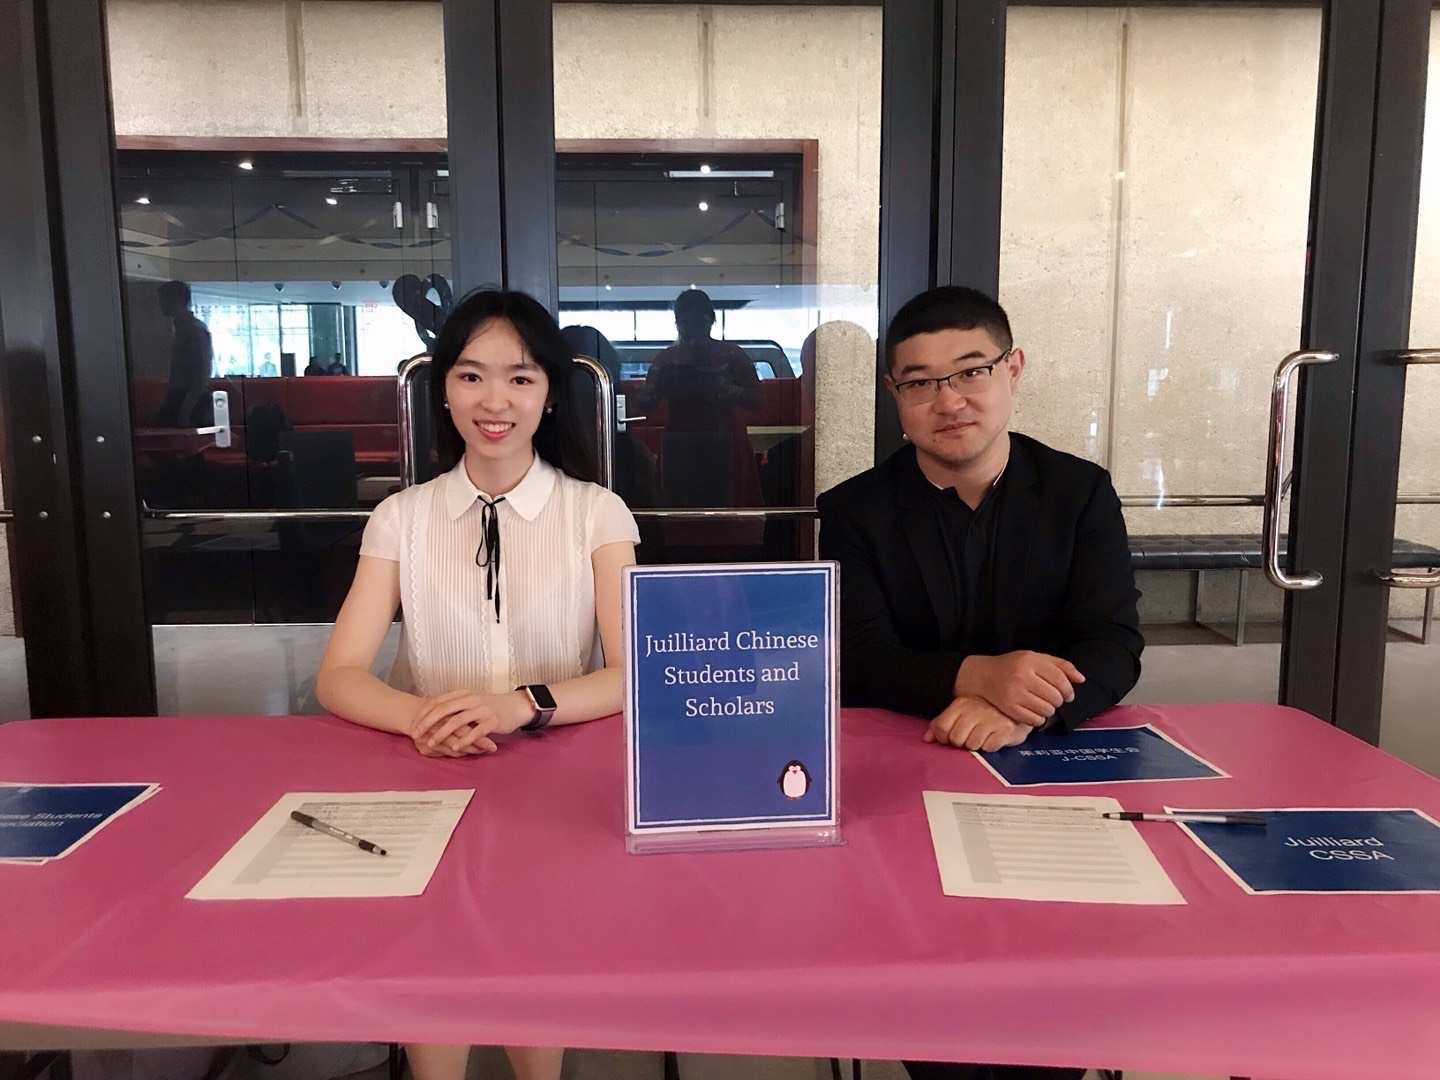 From left to right: Yilun Xu and Duanduan Hao representing the Juilliard CSSA at a campus event. Photo credit: Yilun Xu